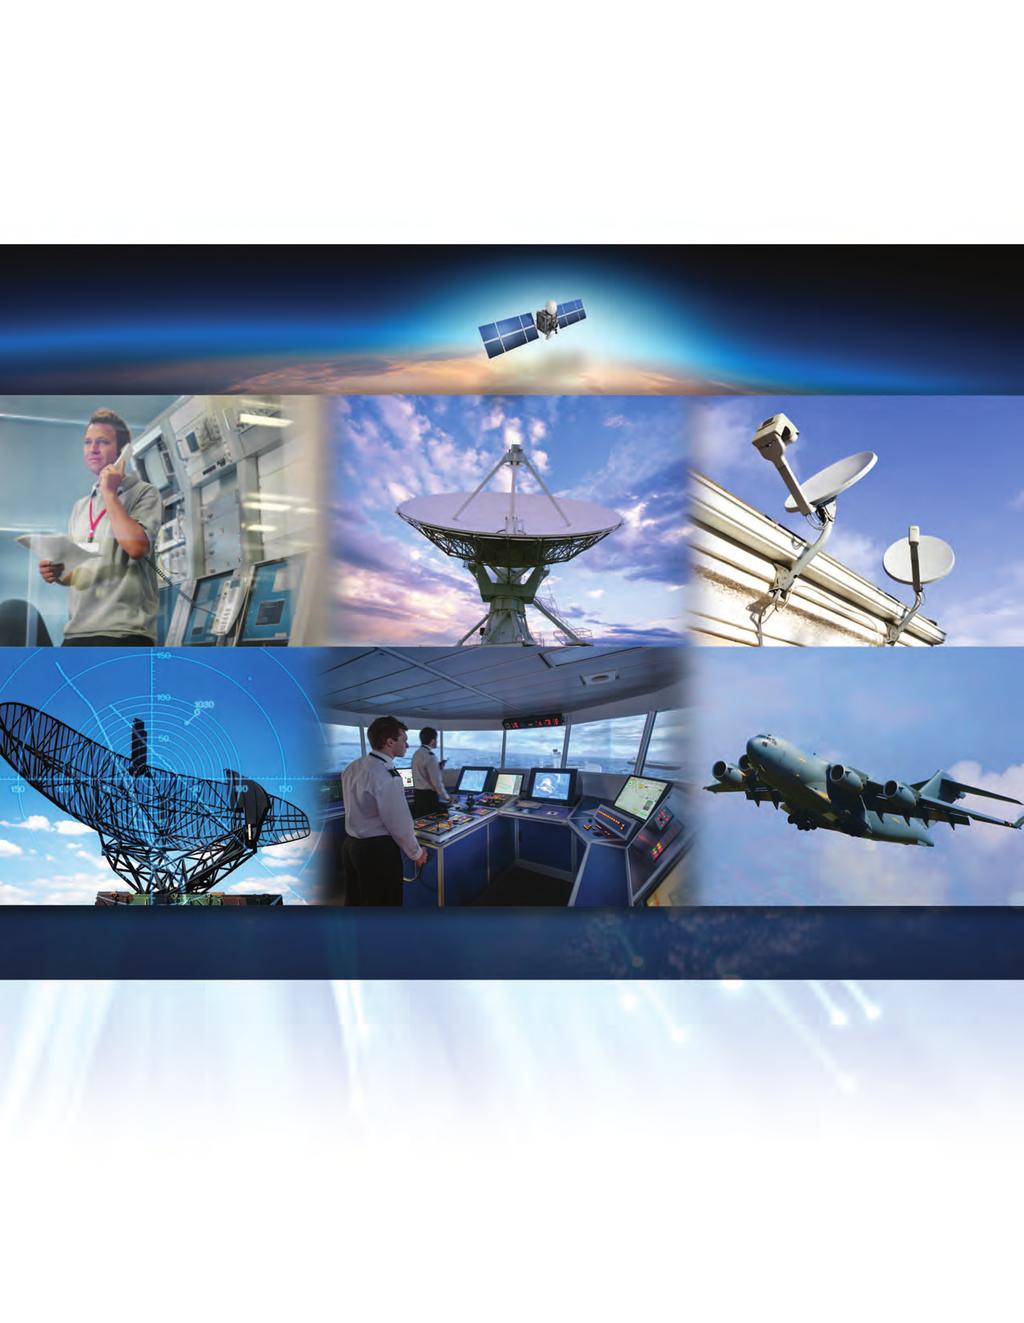 Fiber Optic Transport Solutions for Satellite & Microwave Communications Commercial, Government, Aerospace and Defense BASEBAND, IF, L, S, C, X, DBS, Ku, K, Ka, and Ultra-Wideband Signal Transport